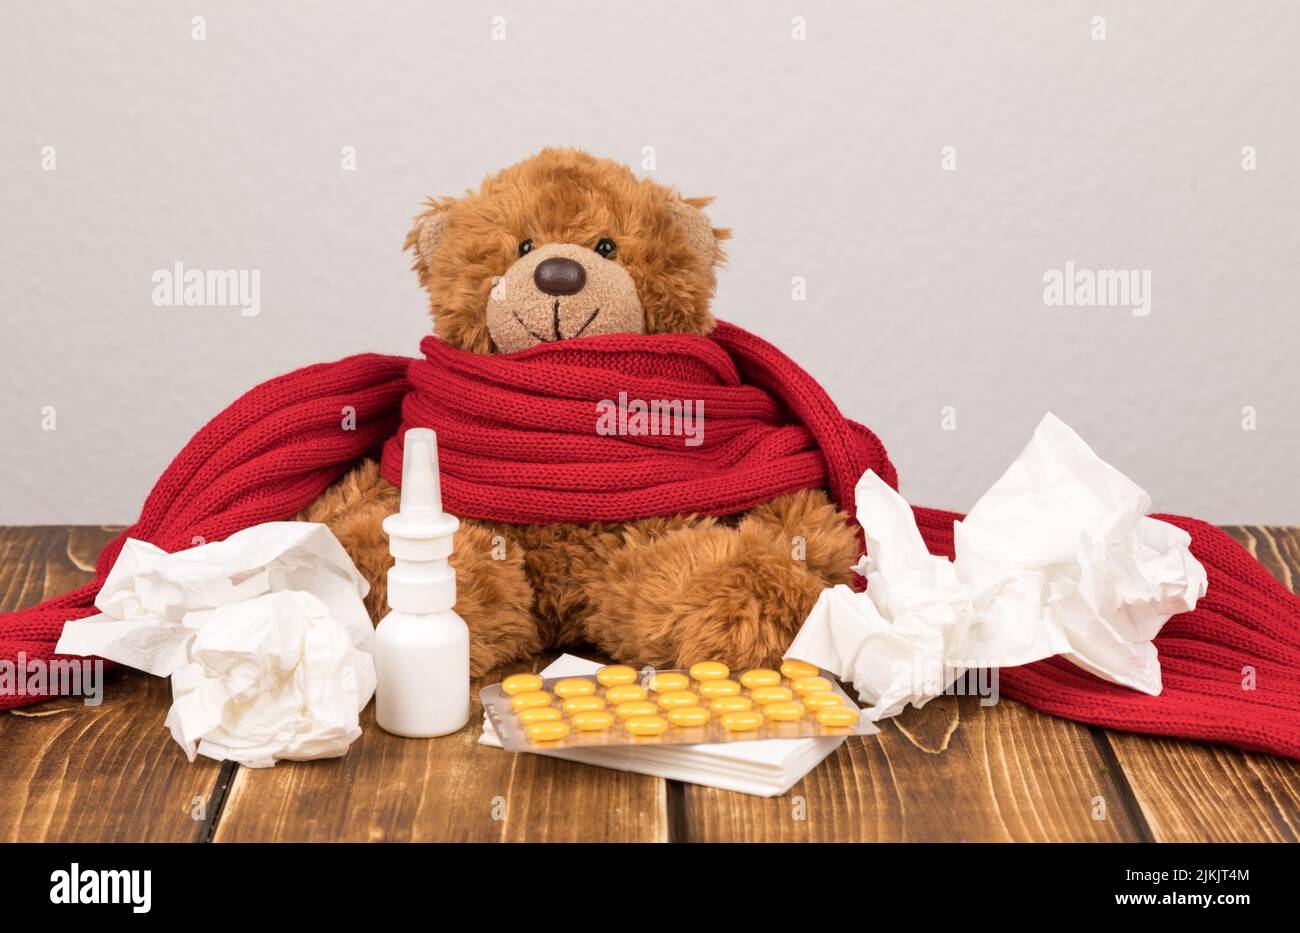 A fluffy teddy bear with a nasal spray, pills, red scarf and tissues on a wooden surface - suffering from illness Stock Photo